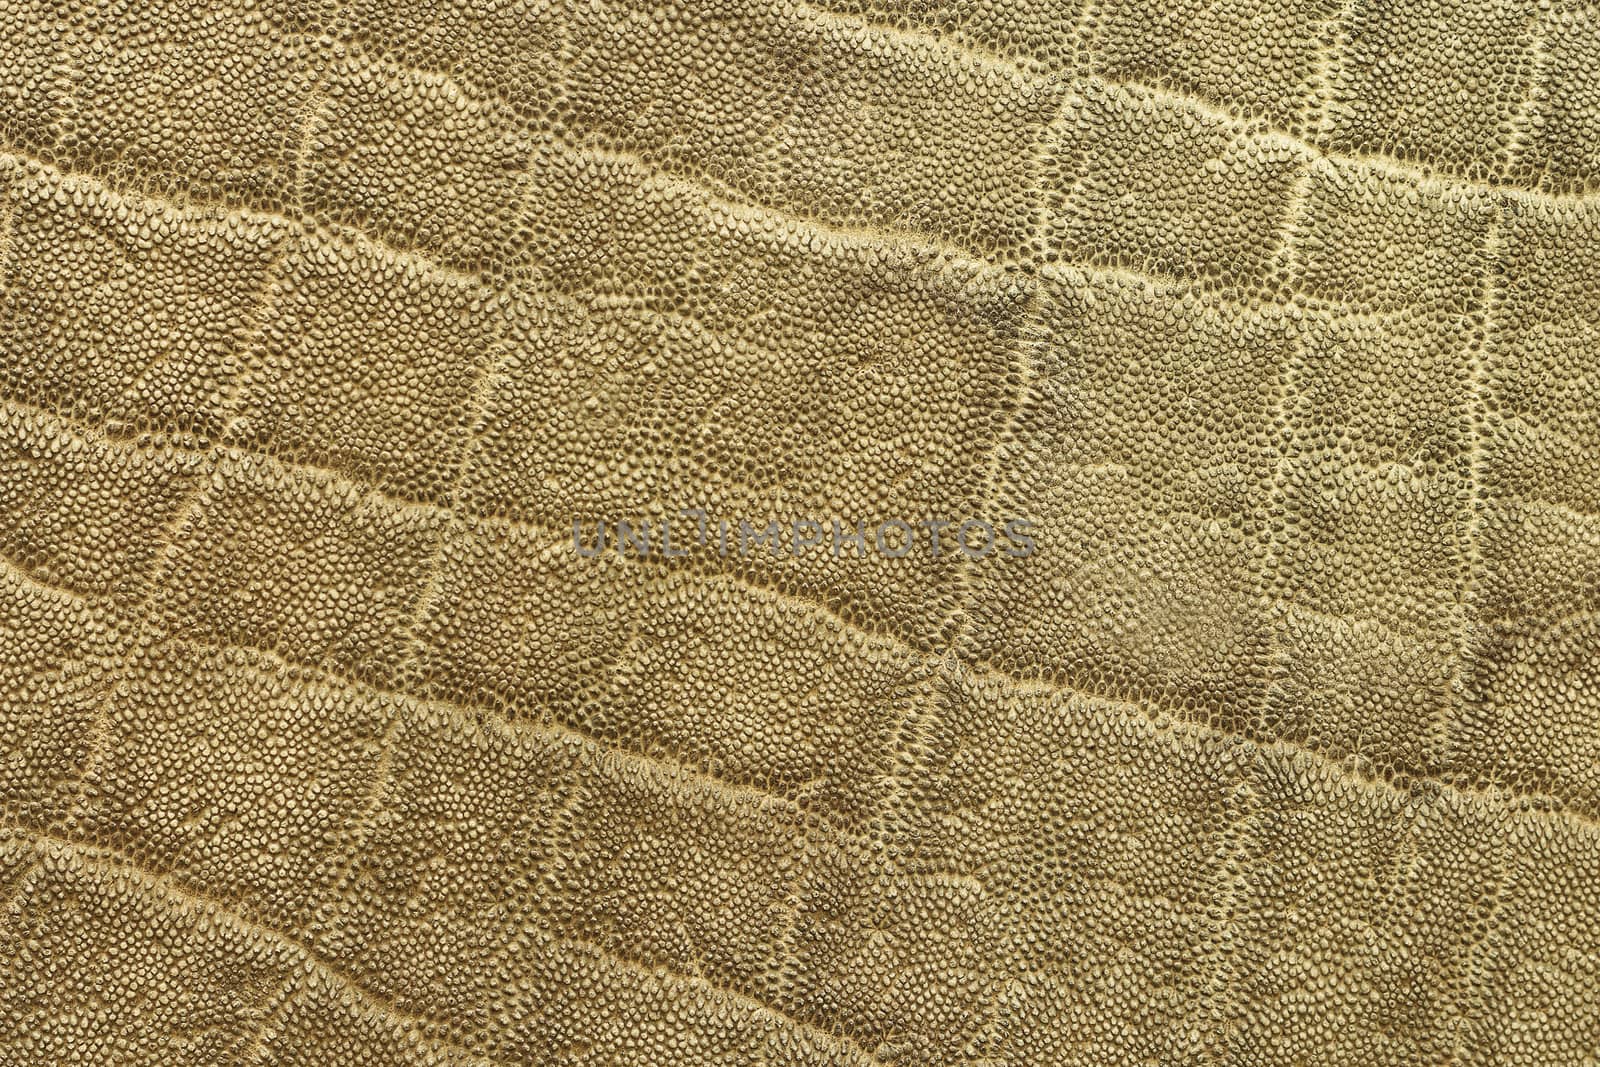 textured detail of african elephant pelt by taviphoto